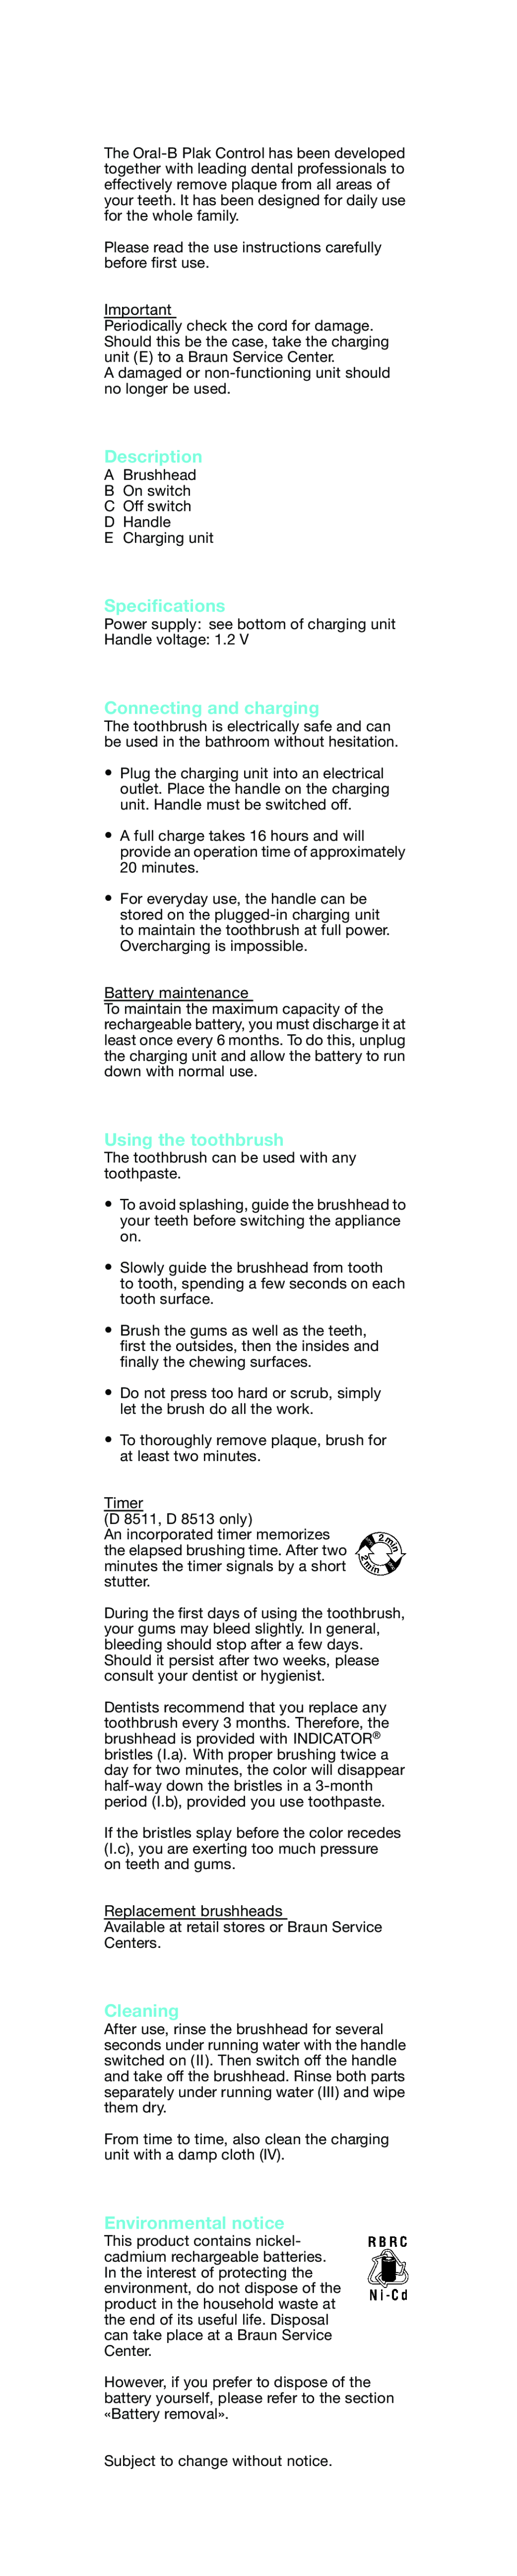 Braun 4728 manual Description, Speciﬁcations, Connecting and charging, Using the toothbrush, Cleaning, Environmental notice 